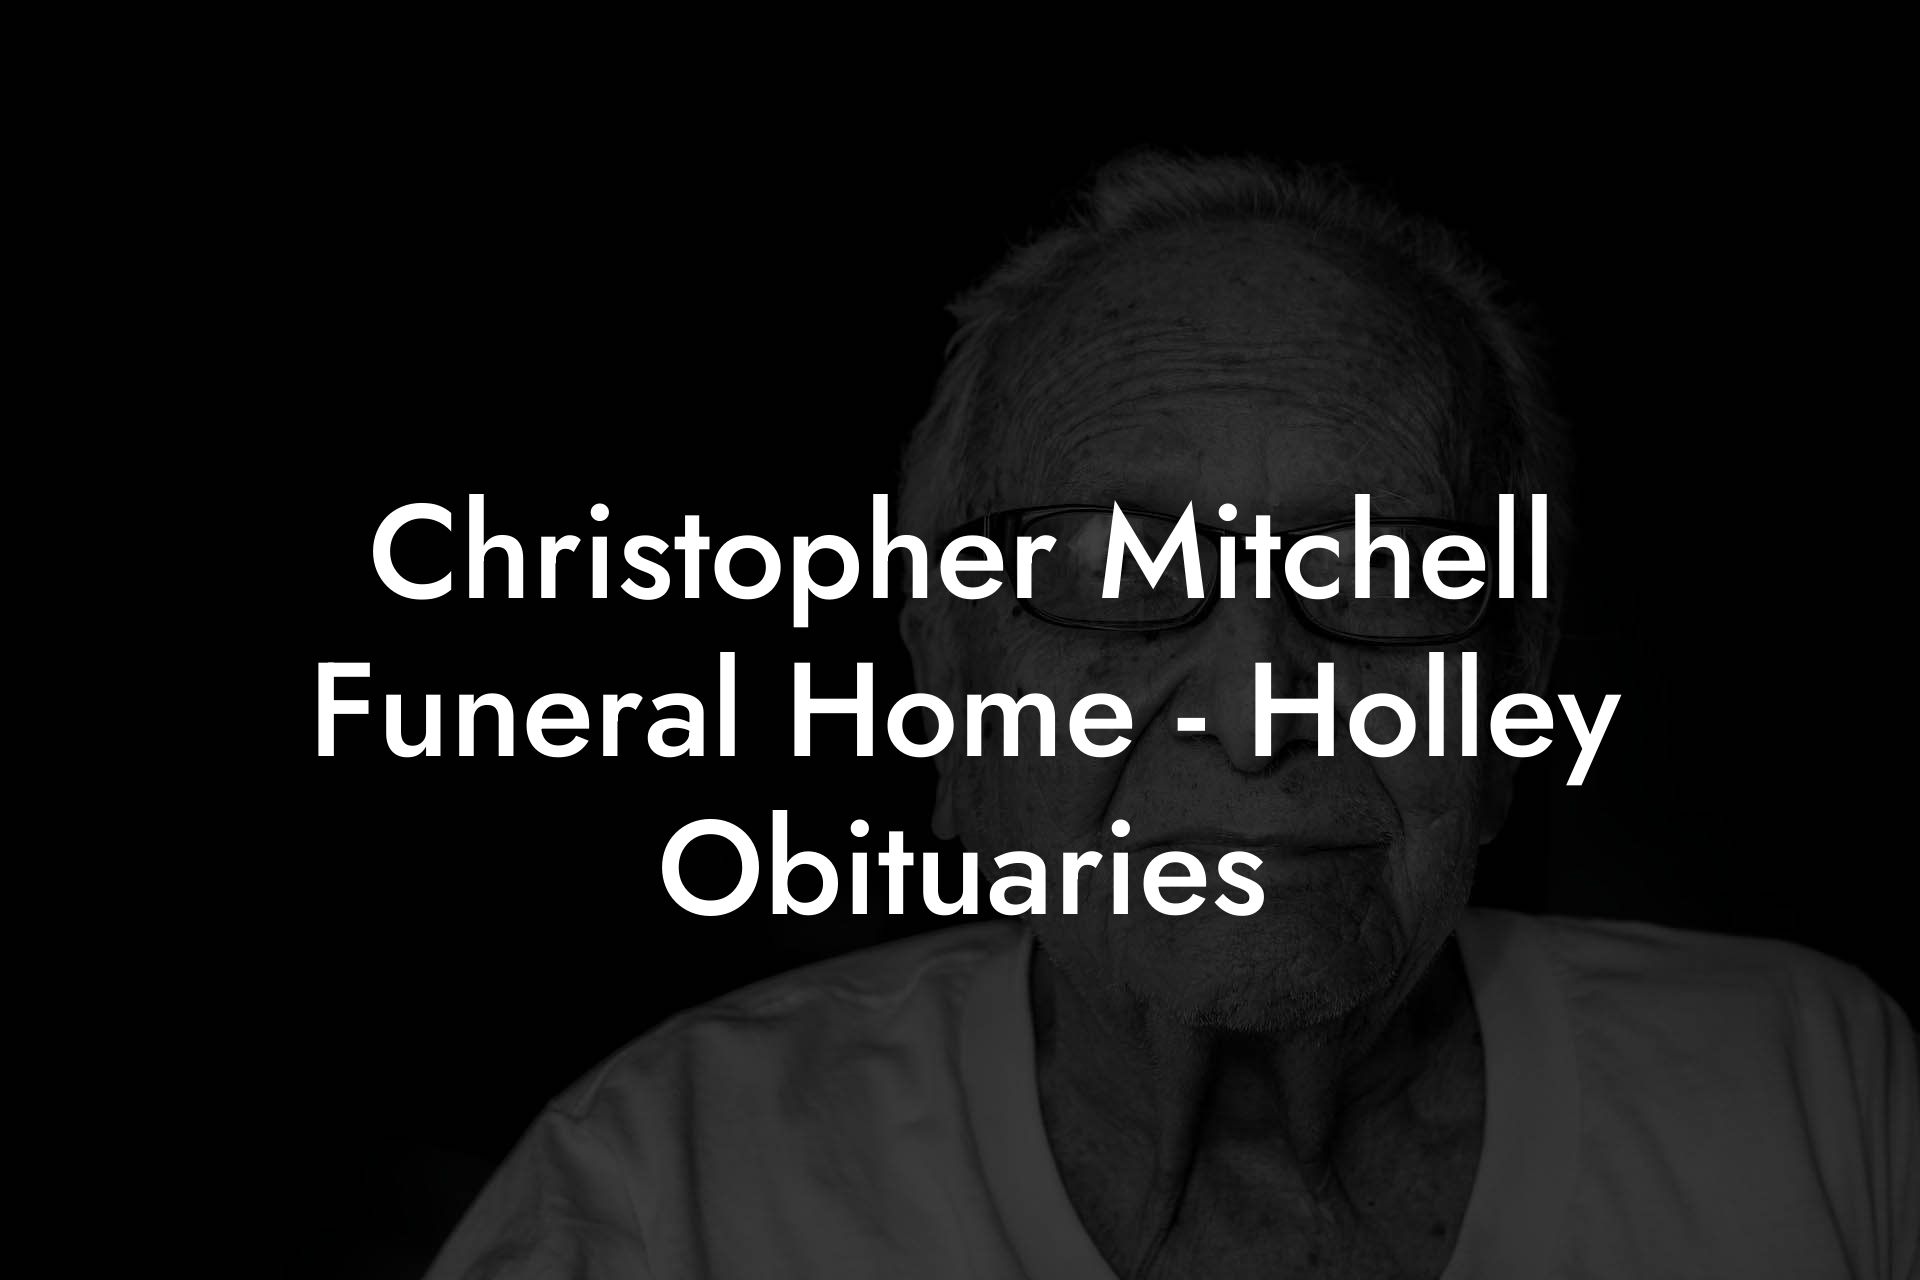 Christopher Mitchell Funeral Home - Holley Obituaries